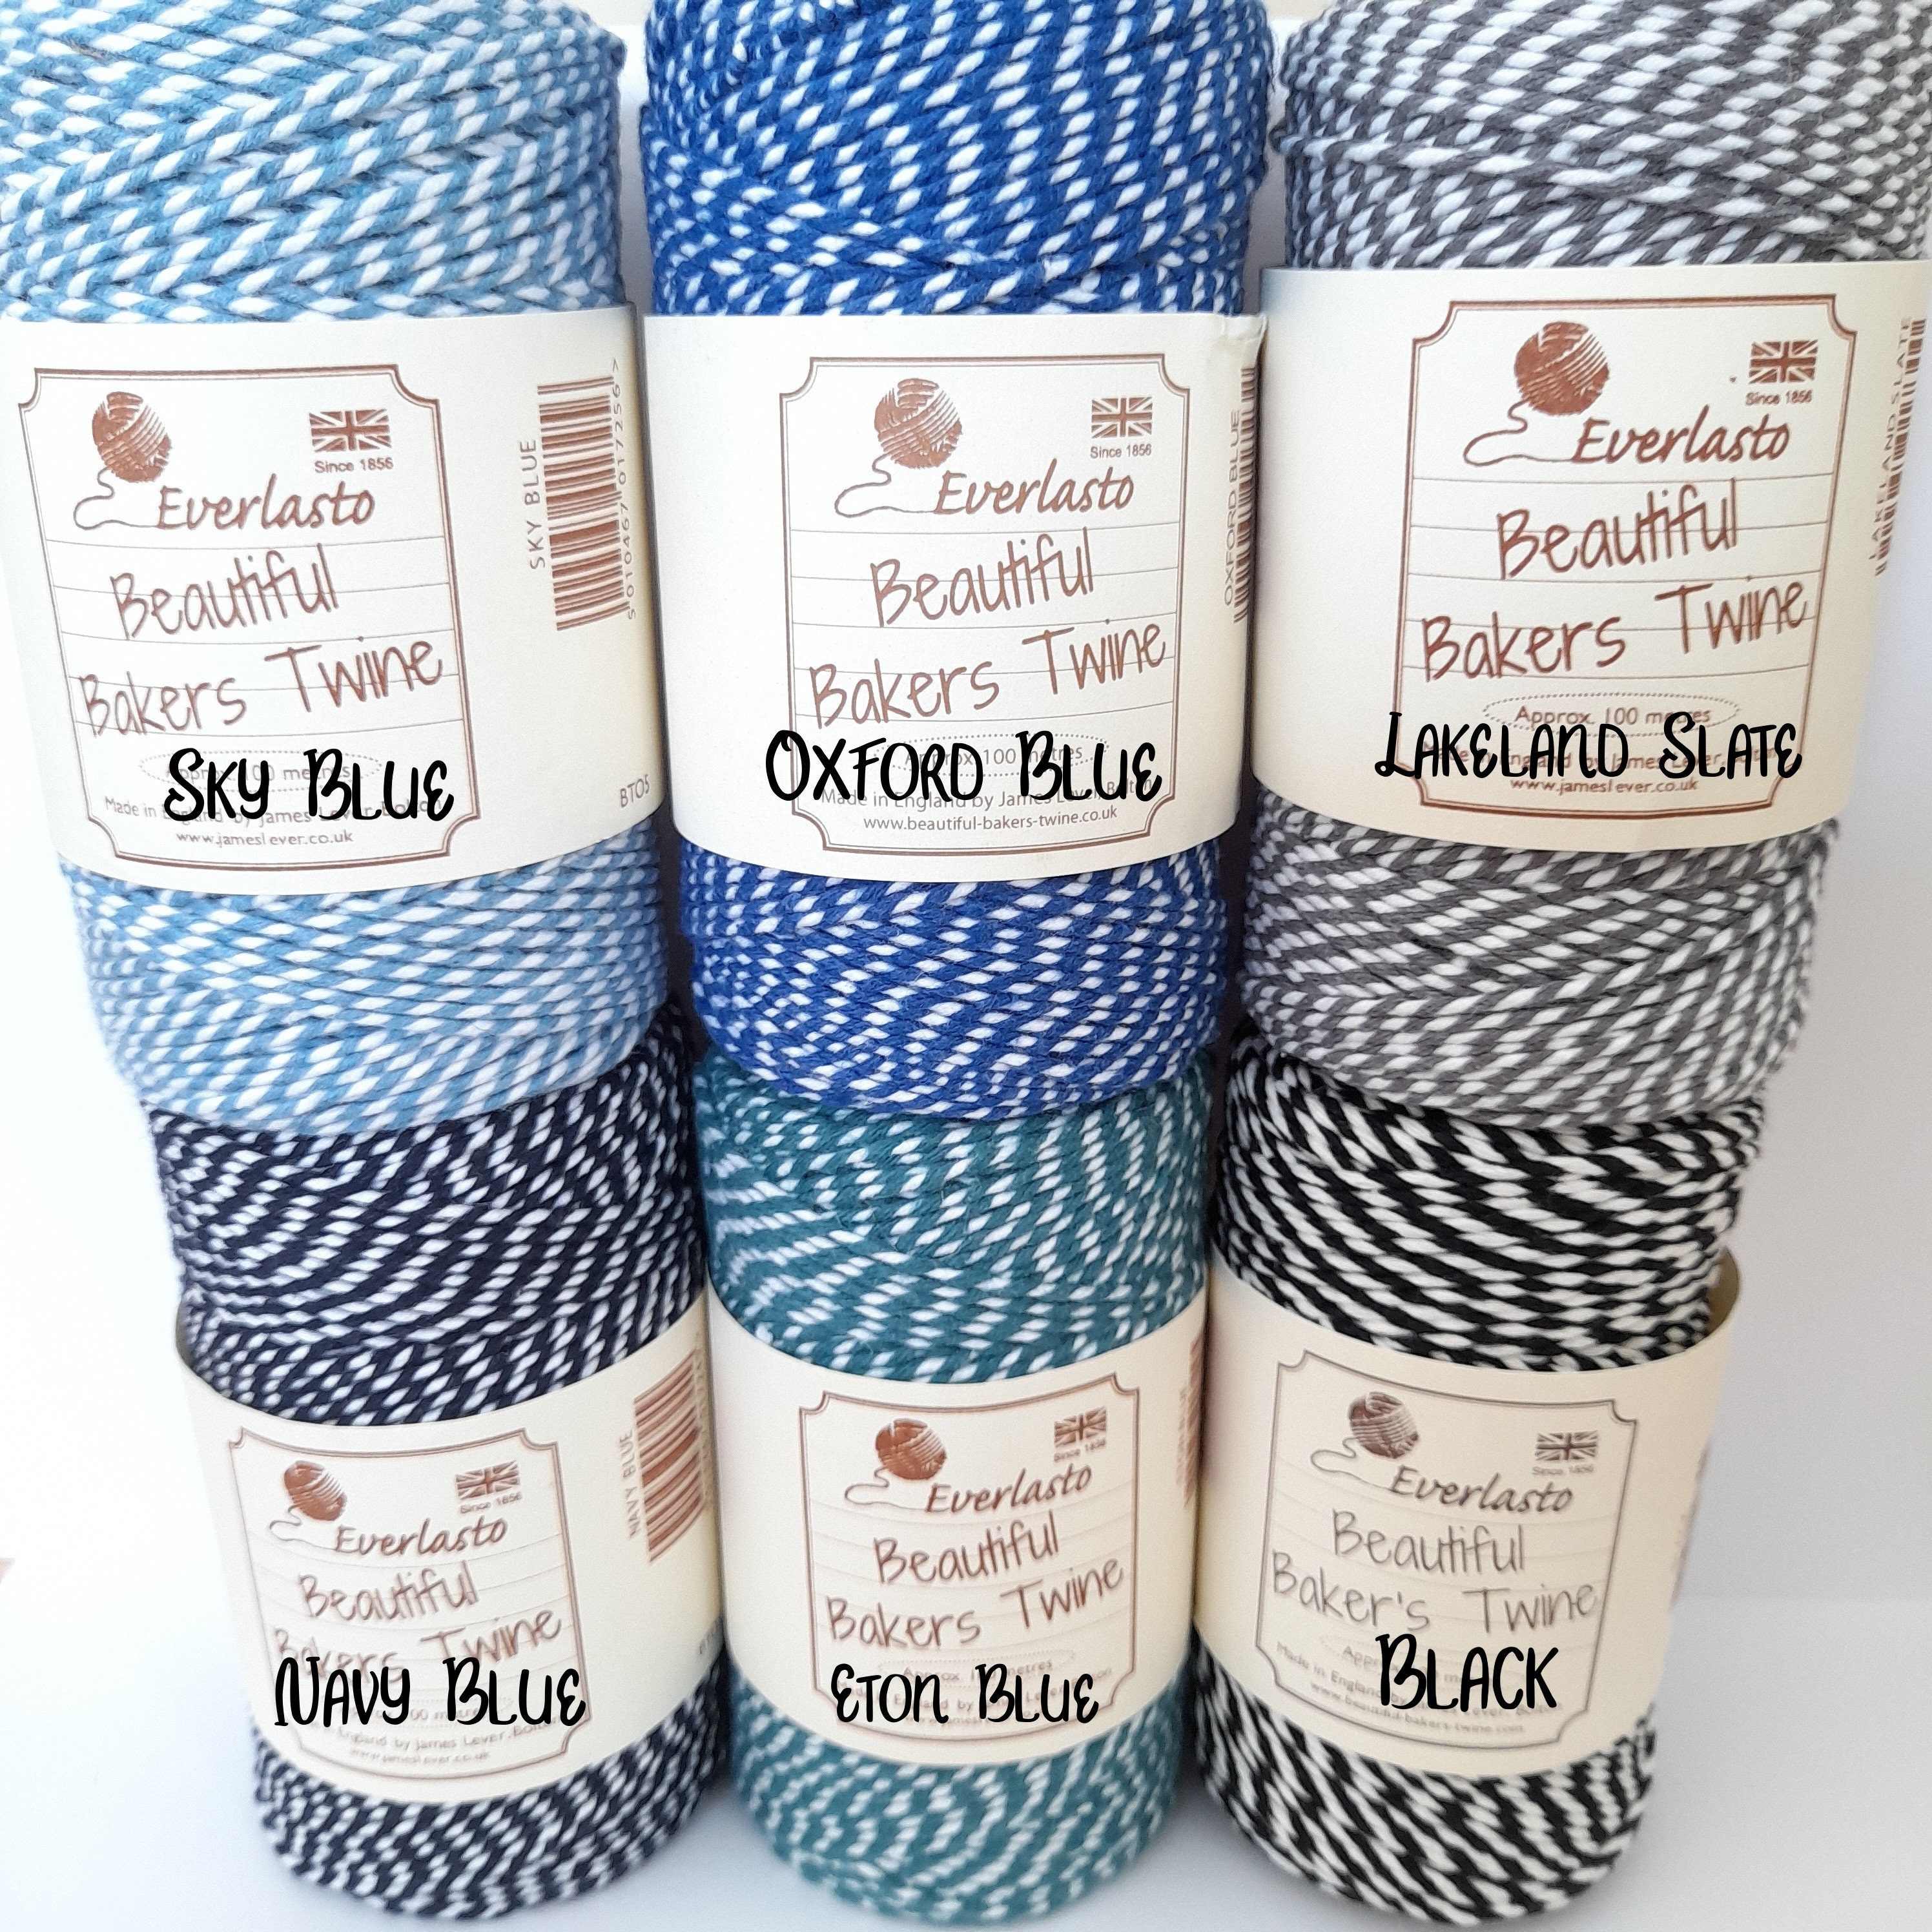 Bakers Twine - Twisted Charcoal Black and White Twine Spool